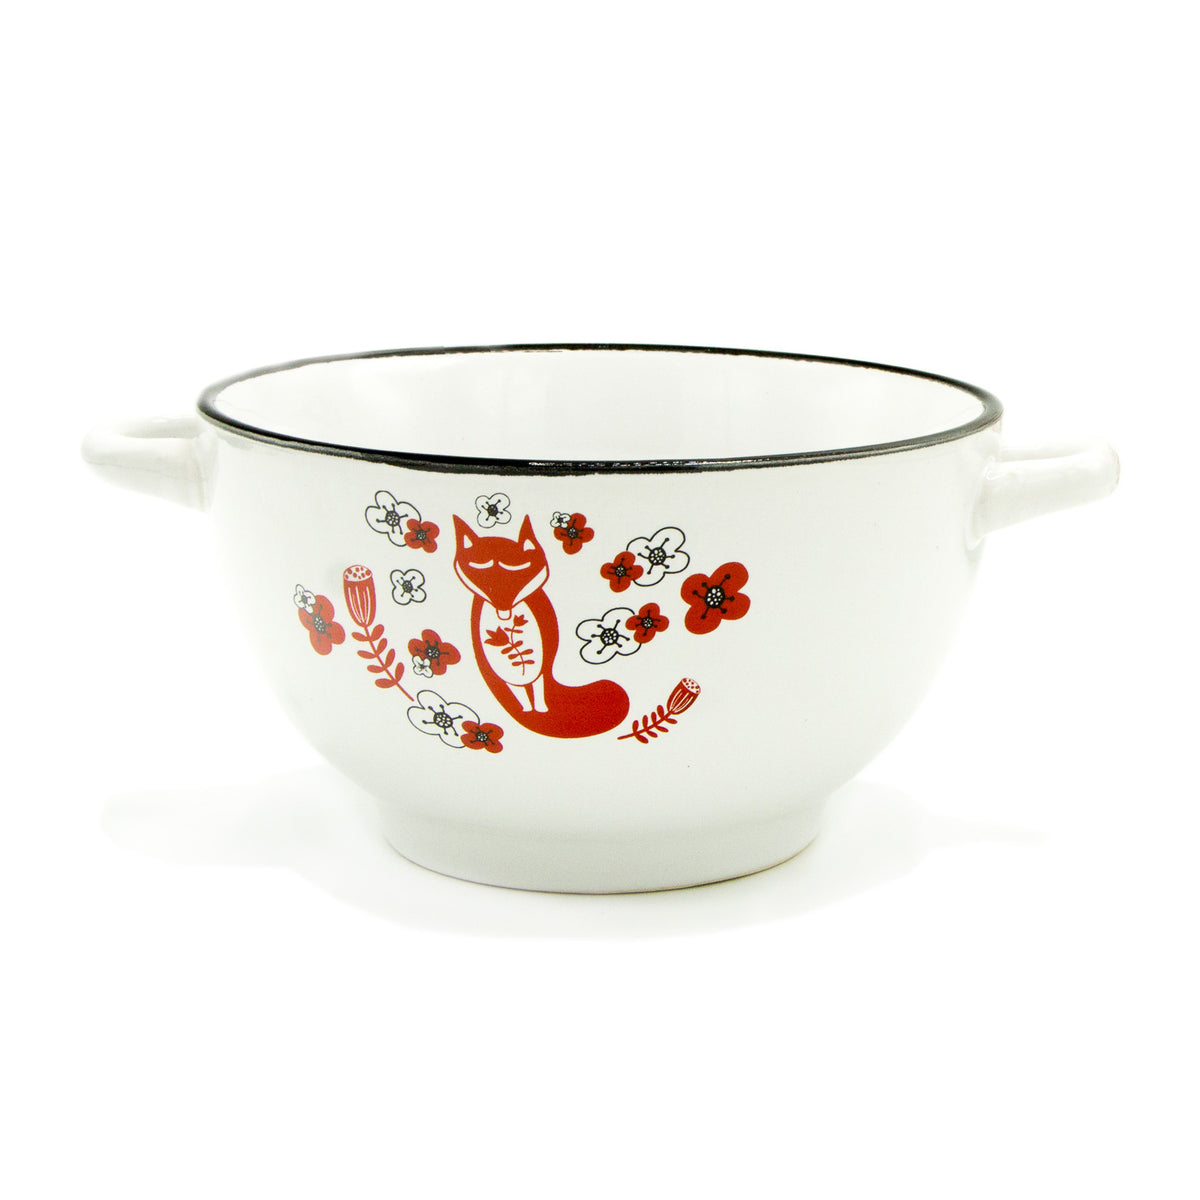 Wholesale 8 Inch Soup Bowls White Porcelain Cereal Bowls with